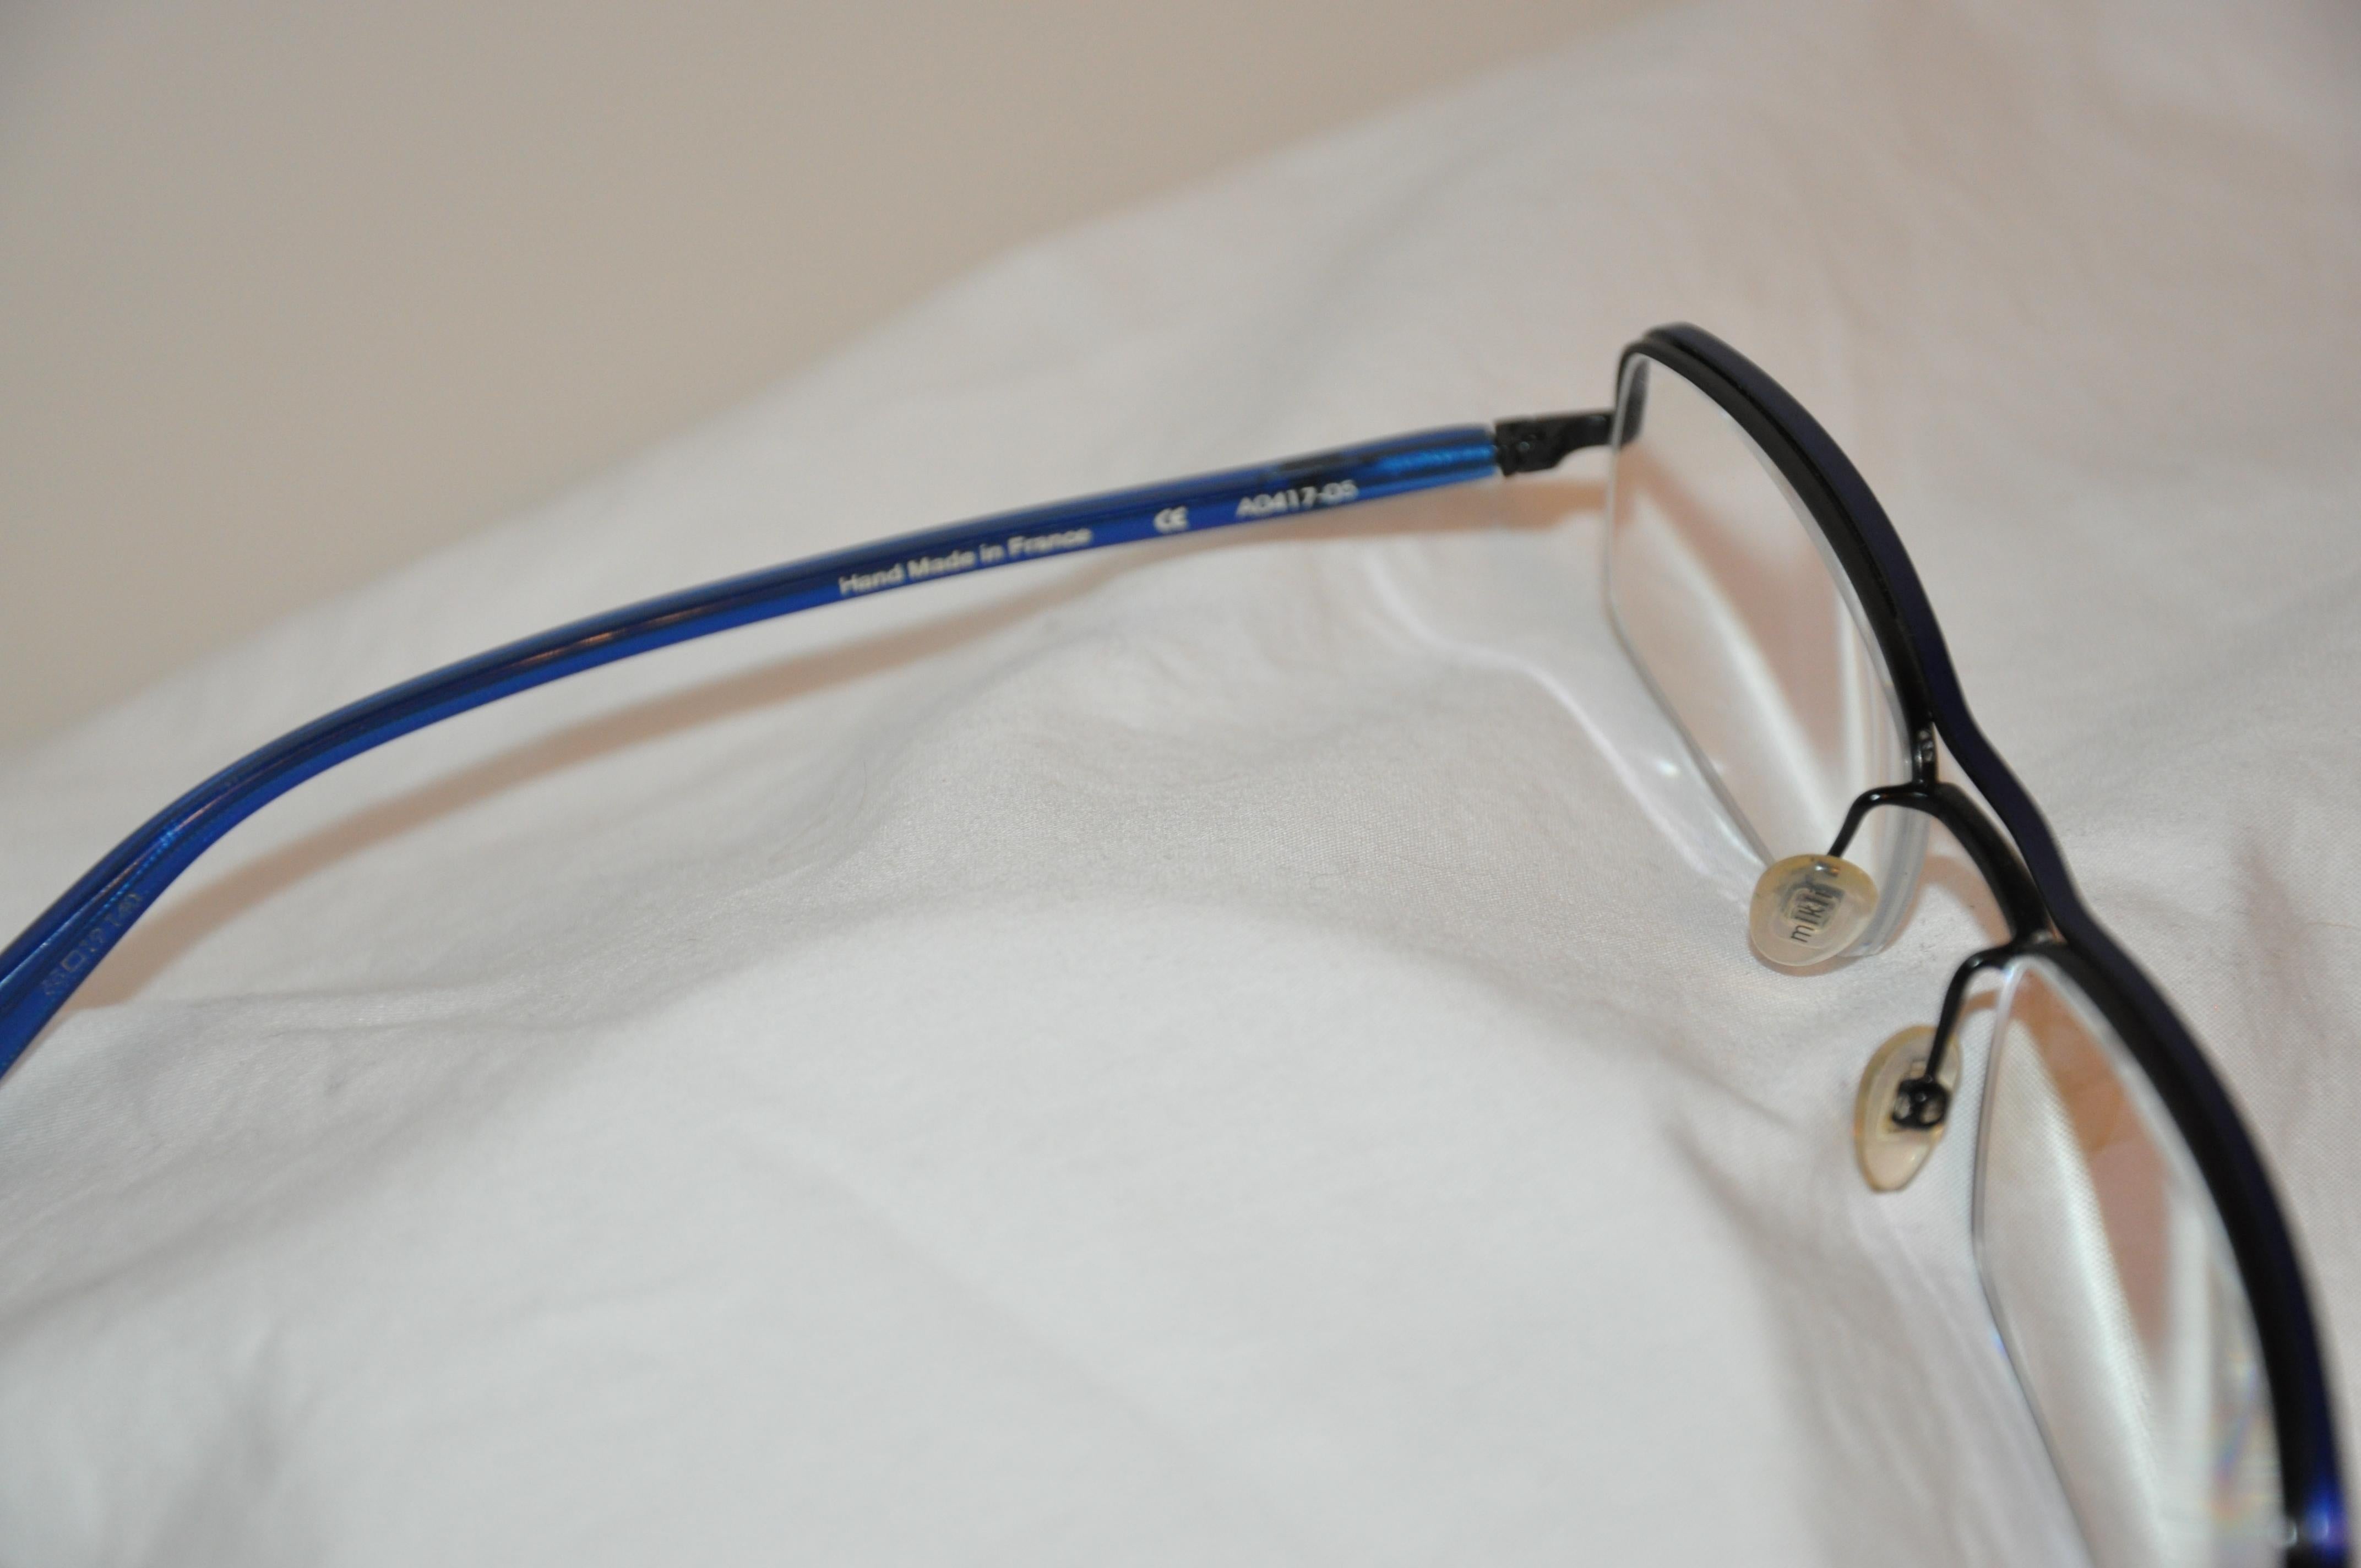 Alain Mikli of Paris wonderfully elegant Lapis-blue prescription frames are accented with black along the corners. Frames are of metal with lucid arms for comfort. Made in France, the front measures 5 1/4 inches across, the height measures 1 1/2